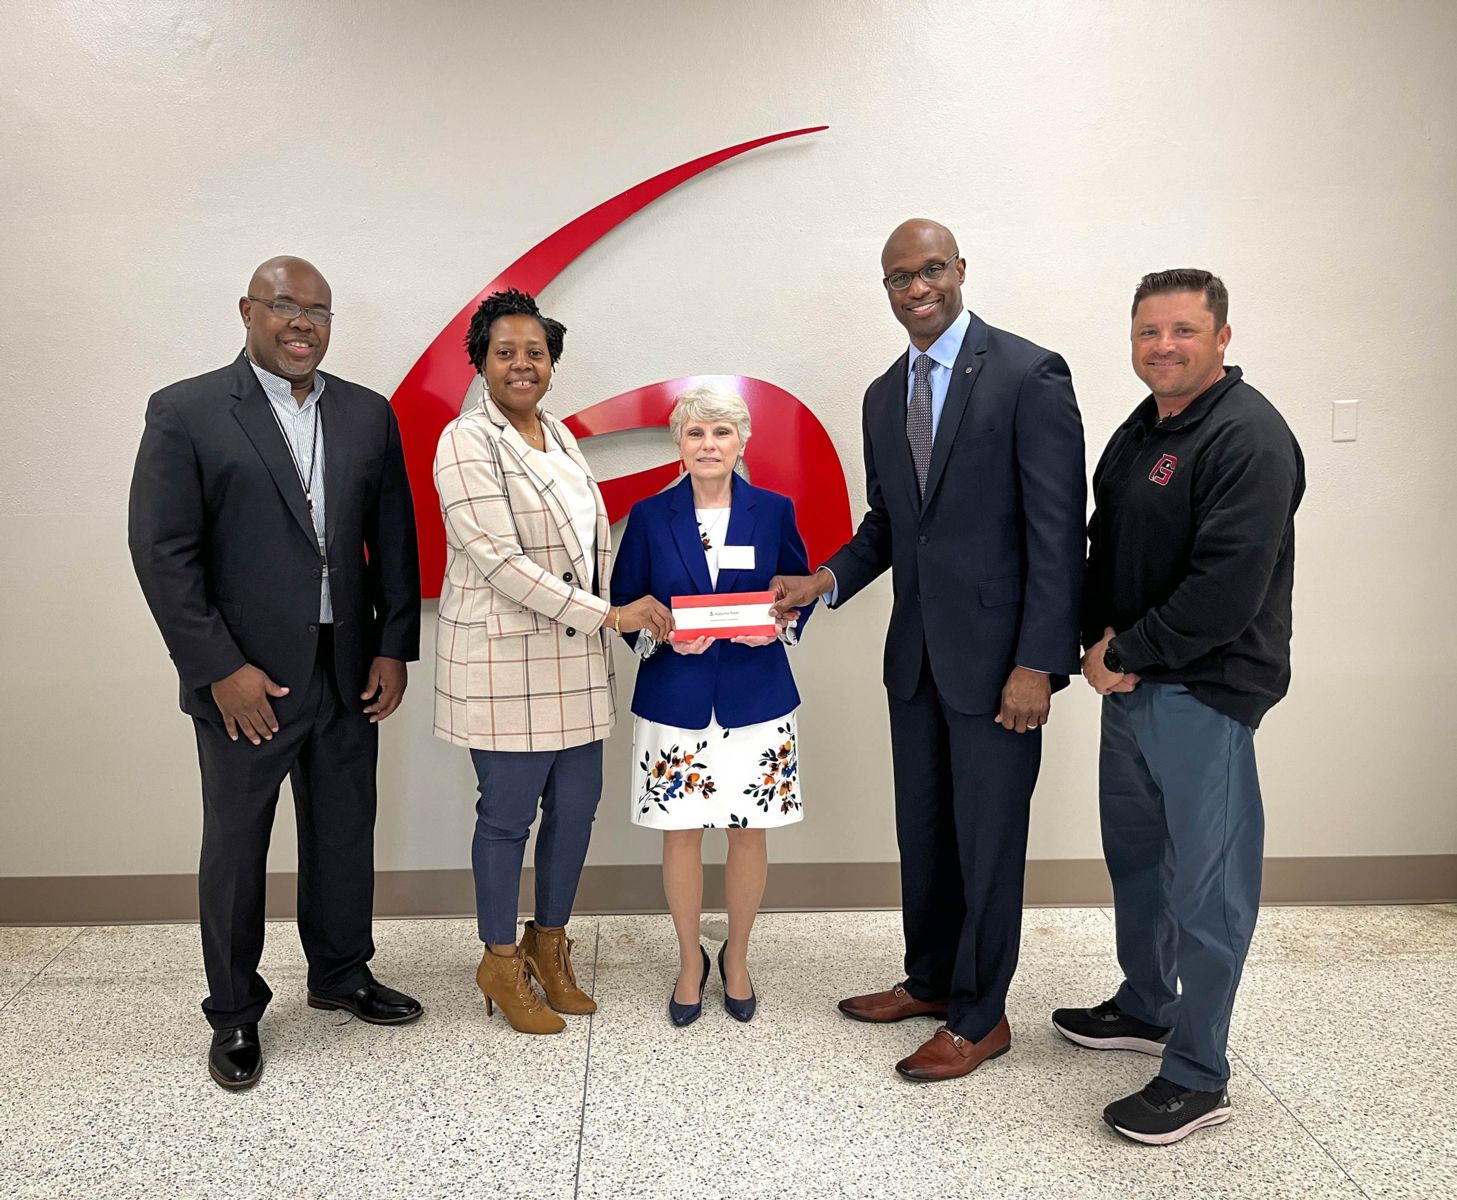 : A check for $50,000 was presented to Dr. Kathy Murphy, middle, president of Gadsden State, and to Blake Lewis, far right, athletic director. Pictured are, from left, Spencer Williams, community relations manager in Etowah County; Dana McFarland, community relations manager in Calhoun County; and Terry Smiley, vice president of Alabama Power’s Eastern Division.